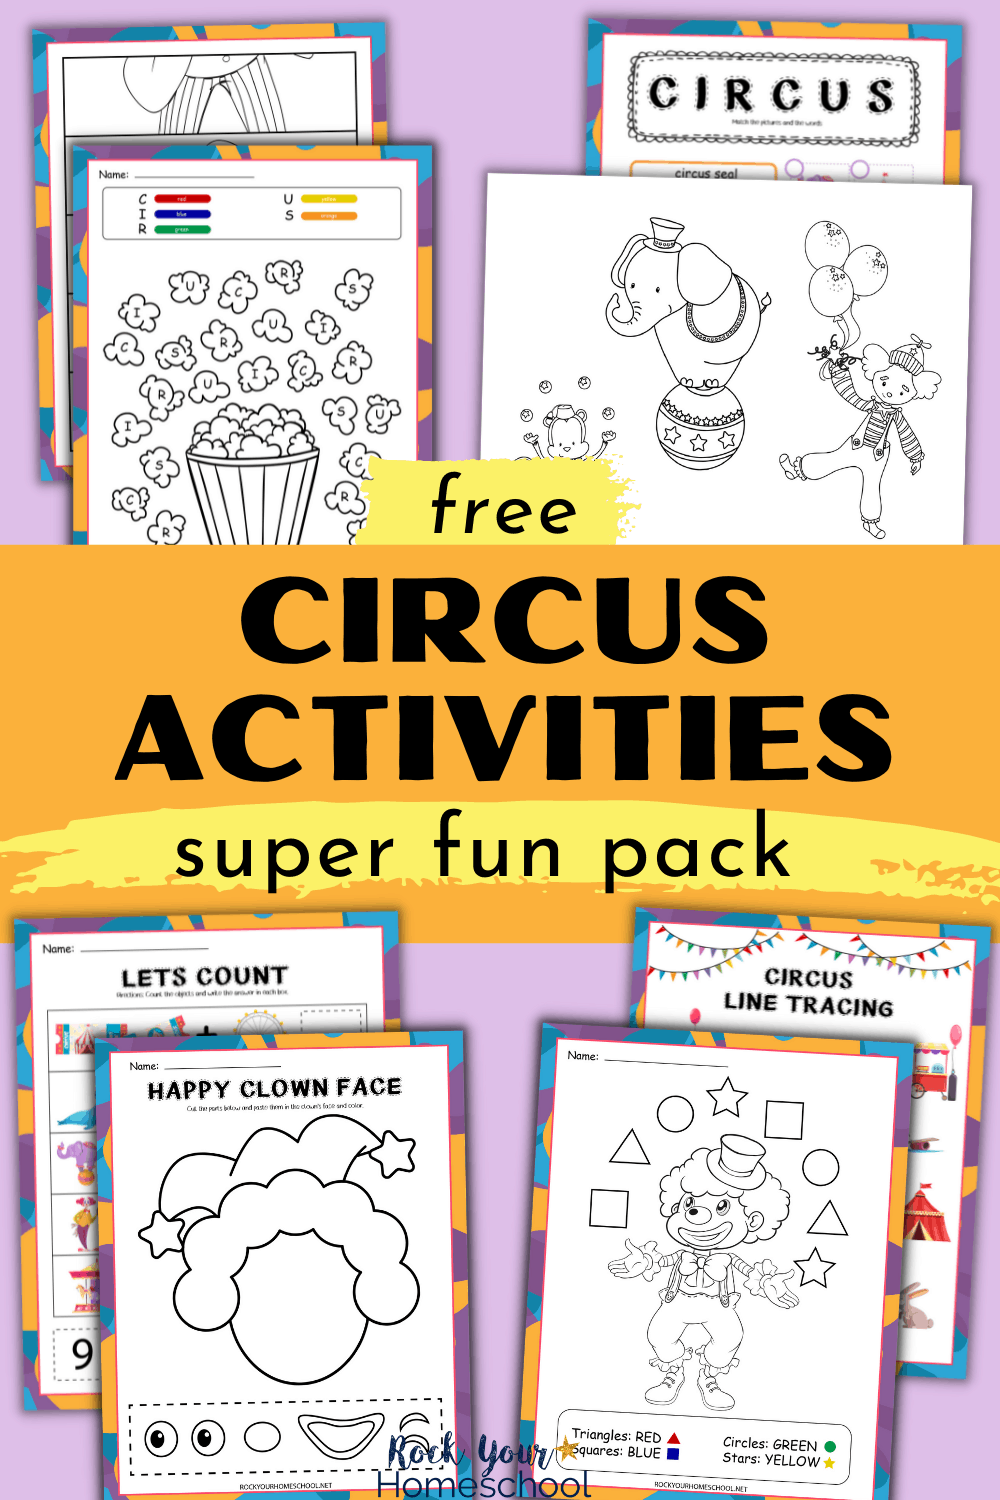 Free Circus Activities Pack of Fun Coloring Pages and More